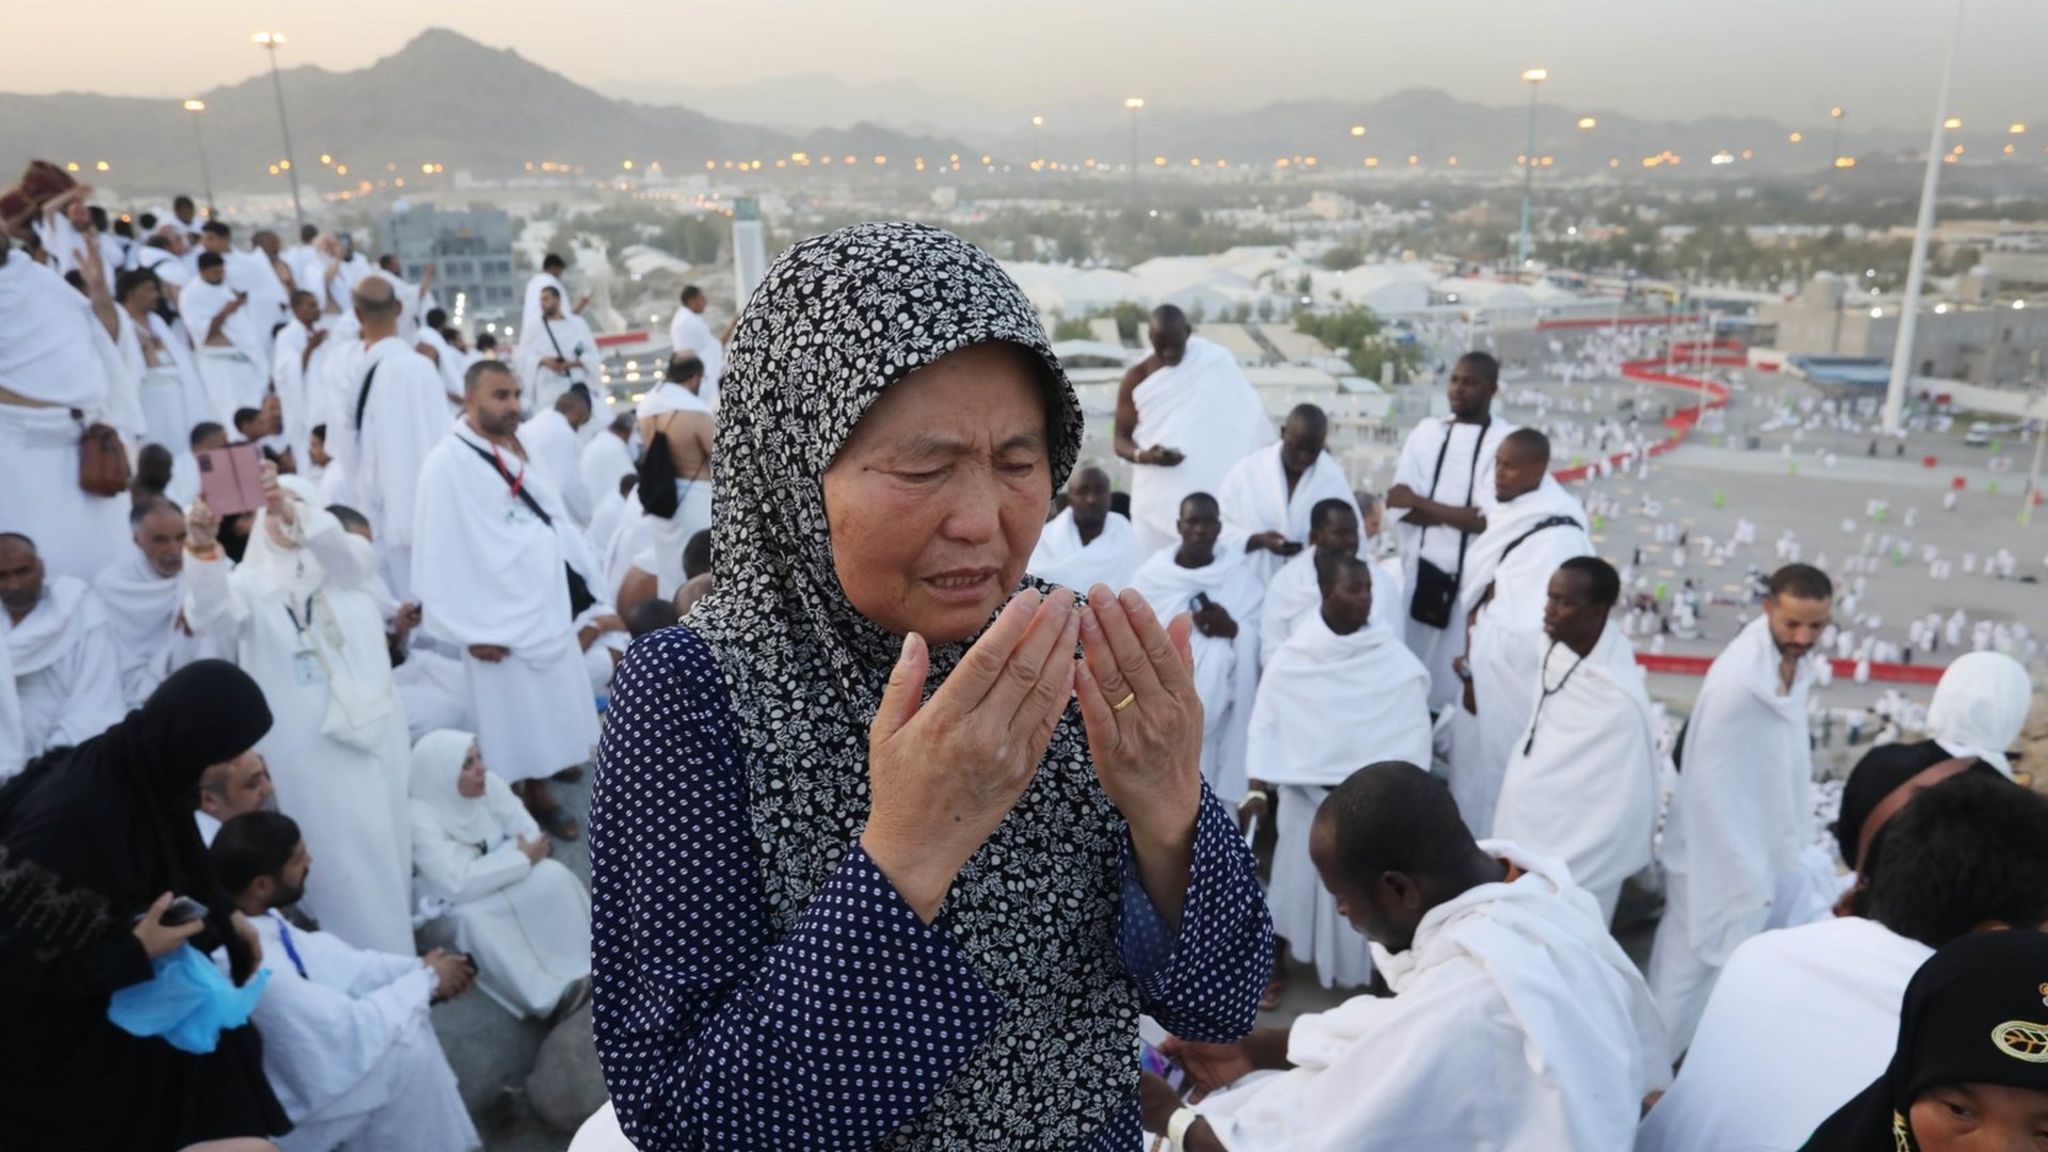 The Rising Cost of the Hajj Financial Barriers for Muslim Pilgrims